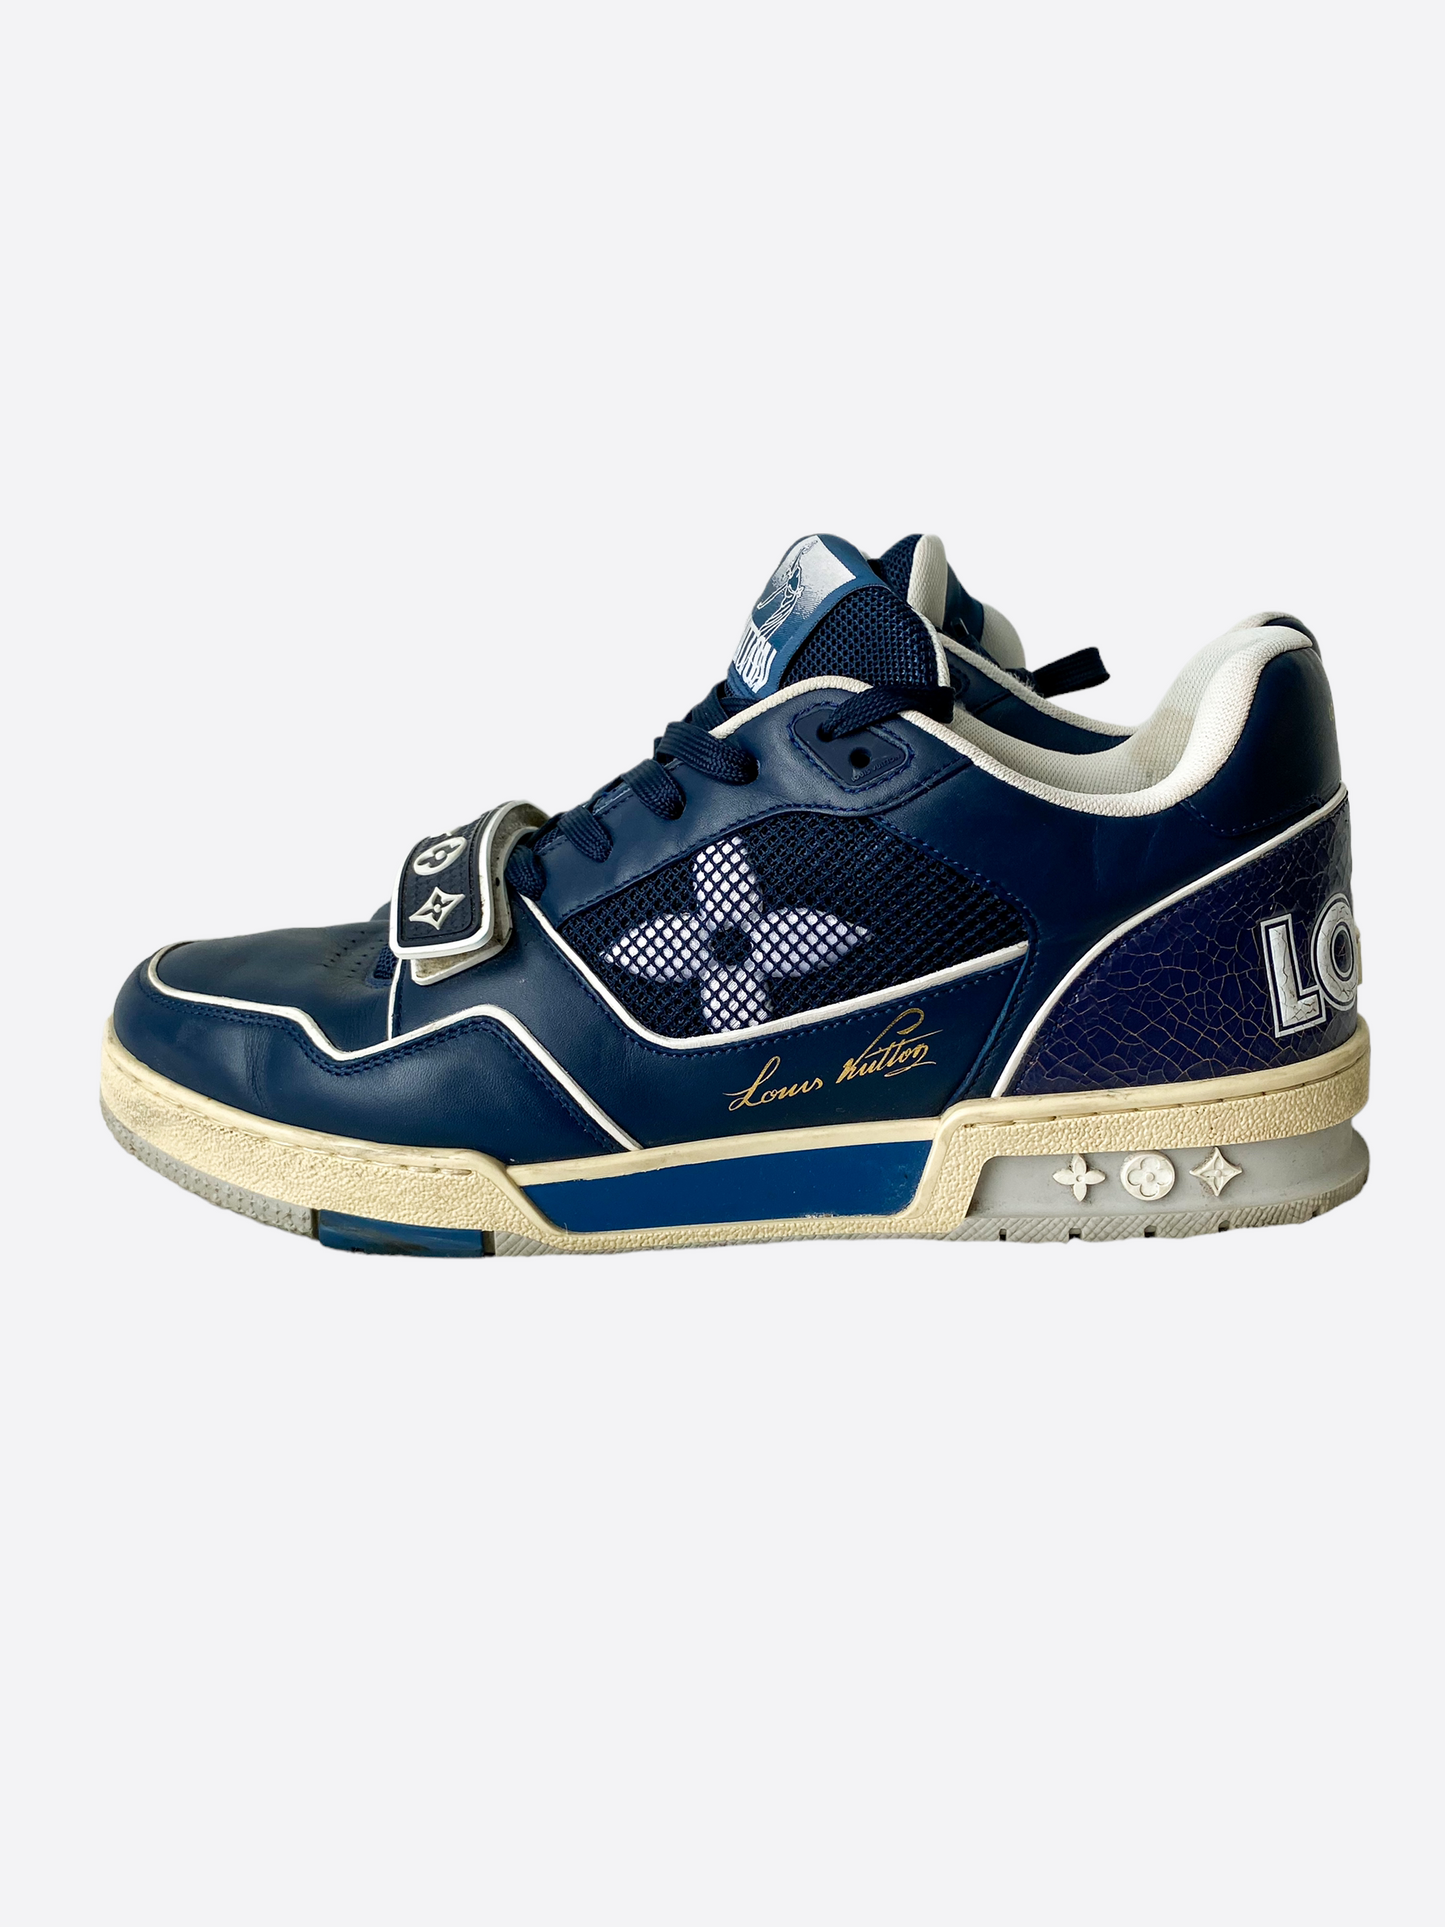 LOUIS VUITTON TRAINER NEW YORK CITY OF DREAMS LIMITED…, LV 10 US 11.5